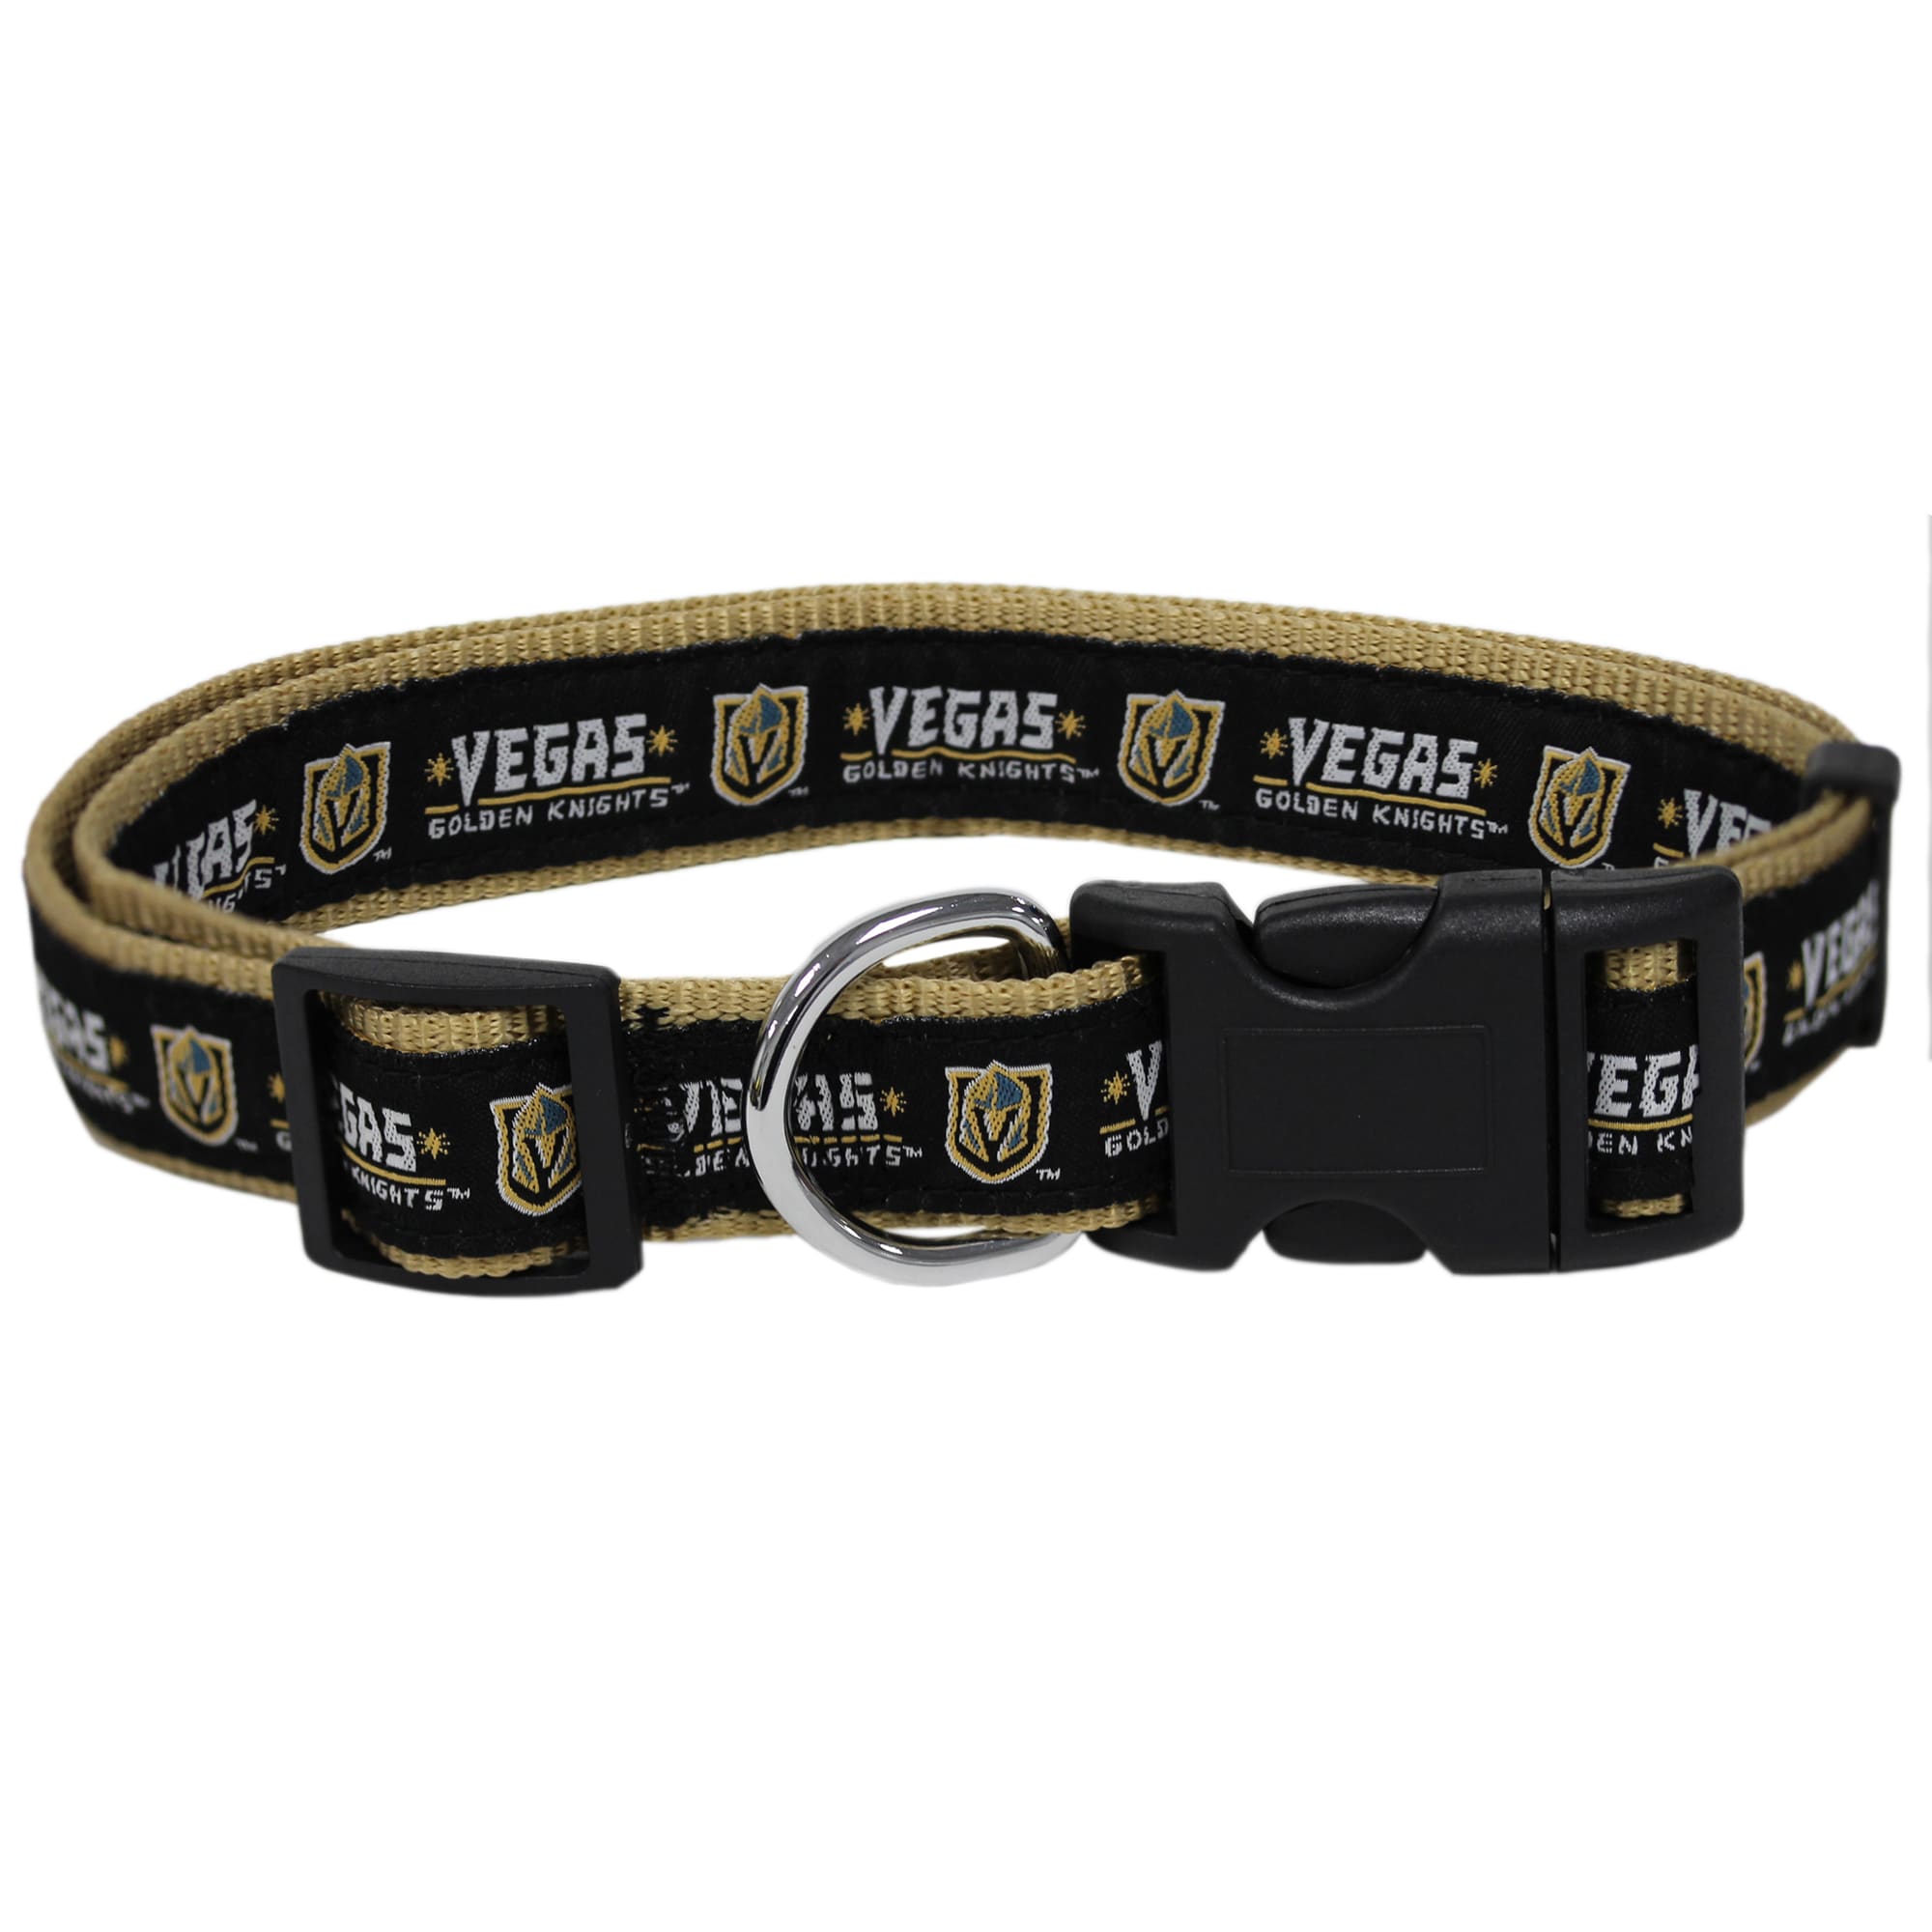 Photos - Collar / Harnesses Pets First Vegas Golden Knights Dog Collar, Small, Multi-Color 